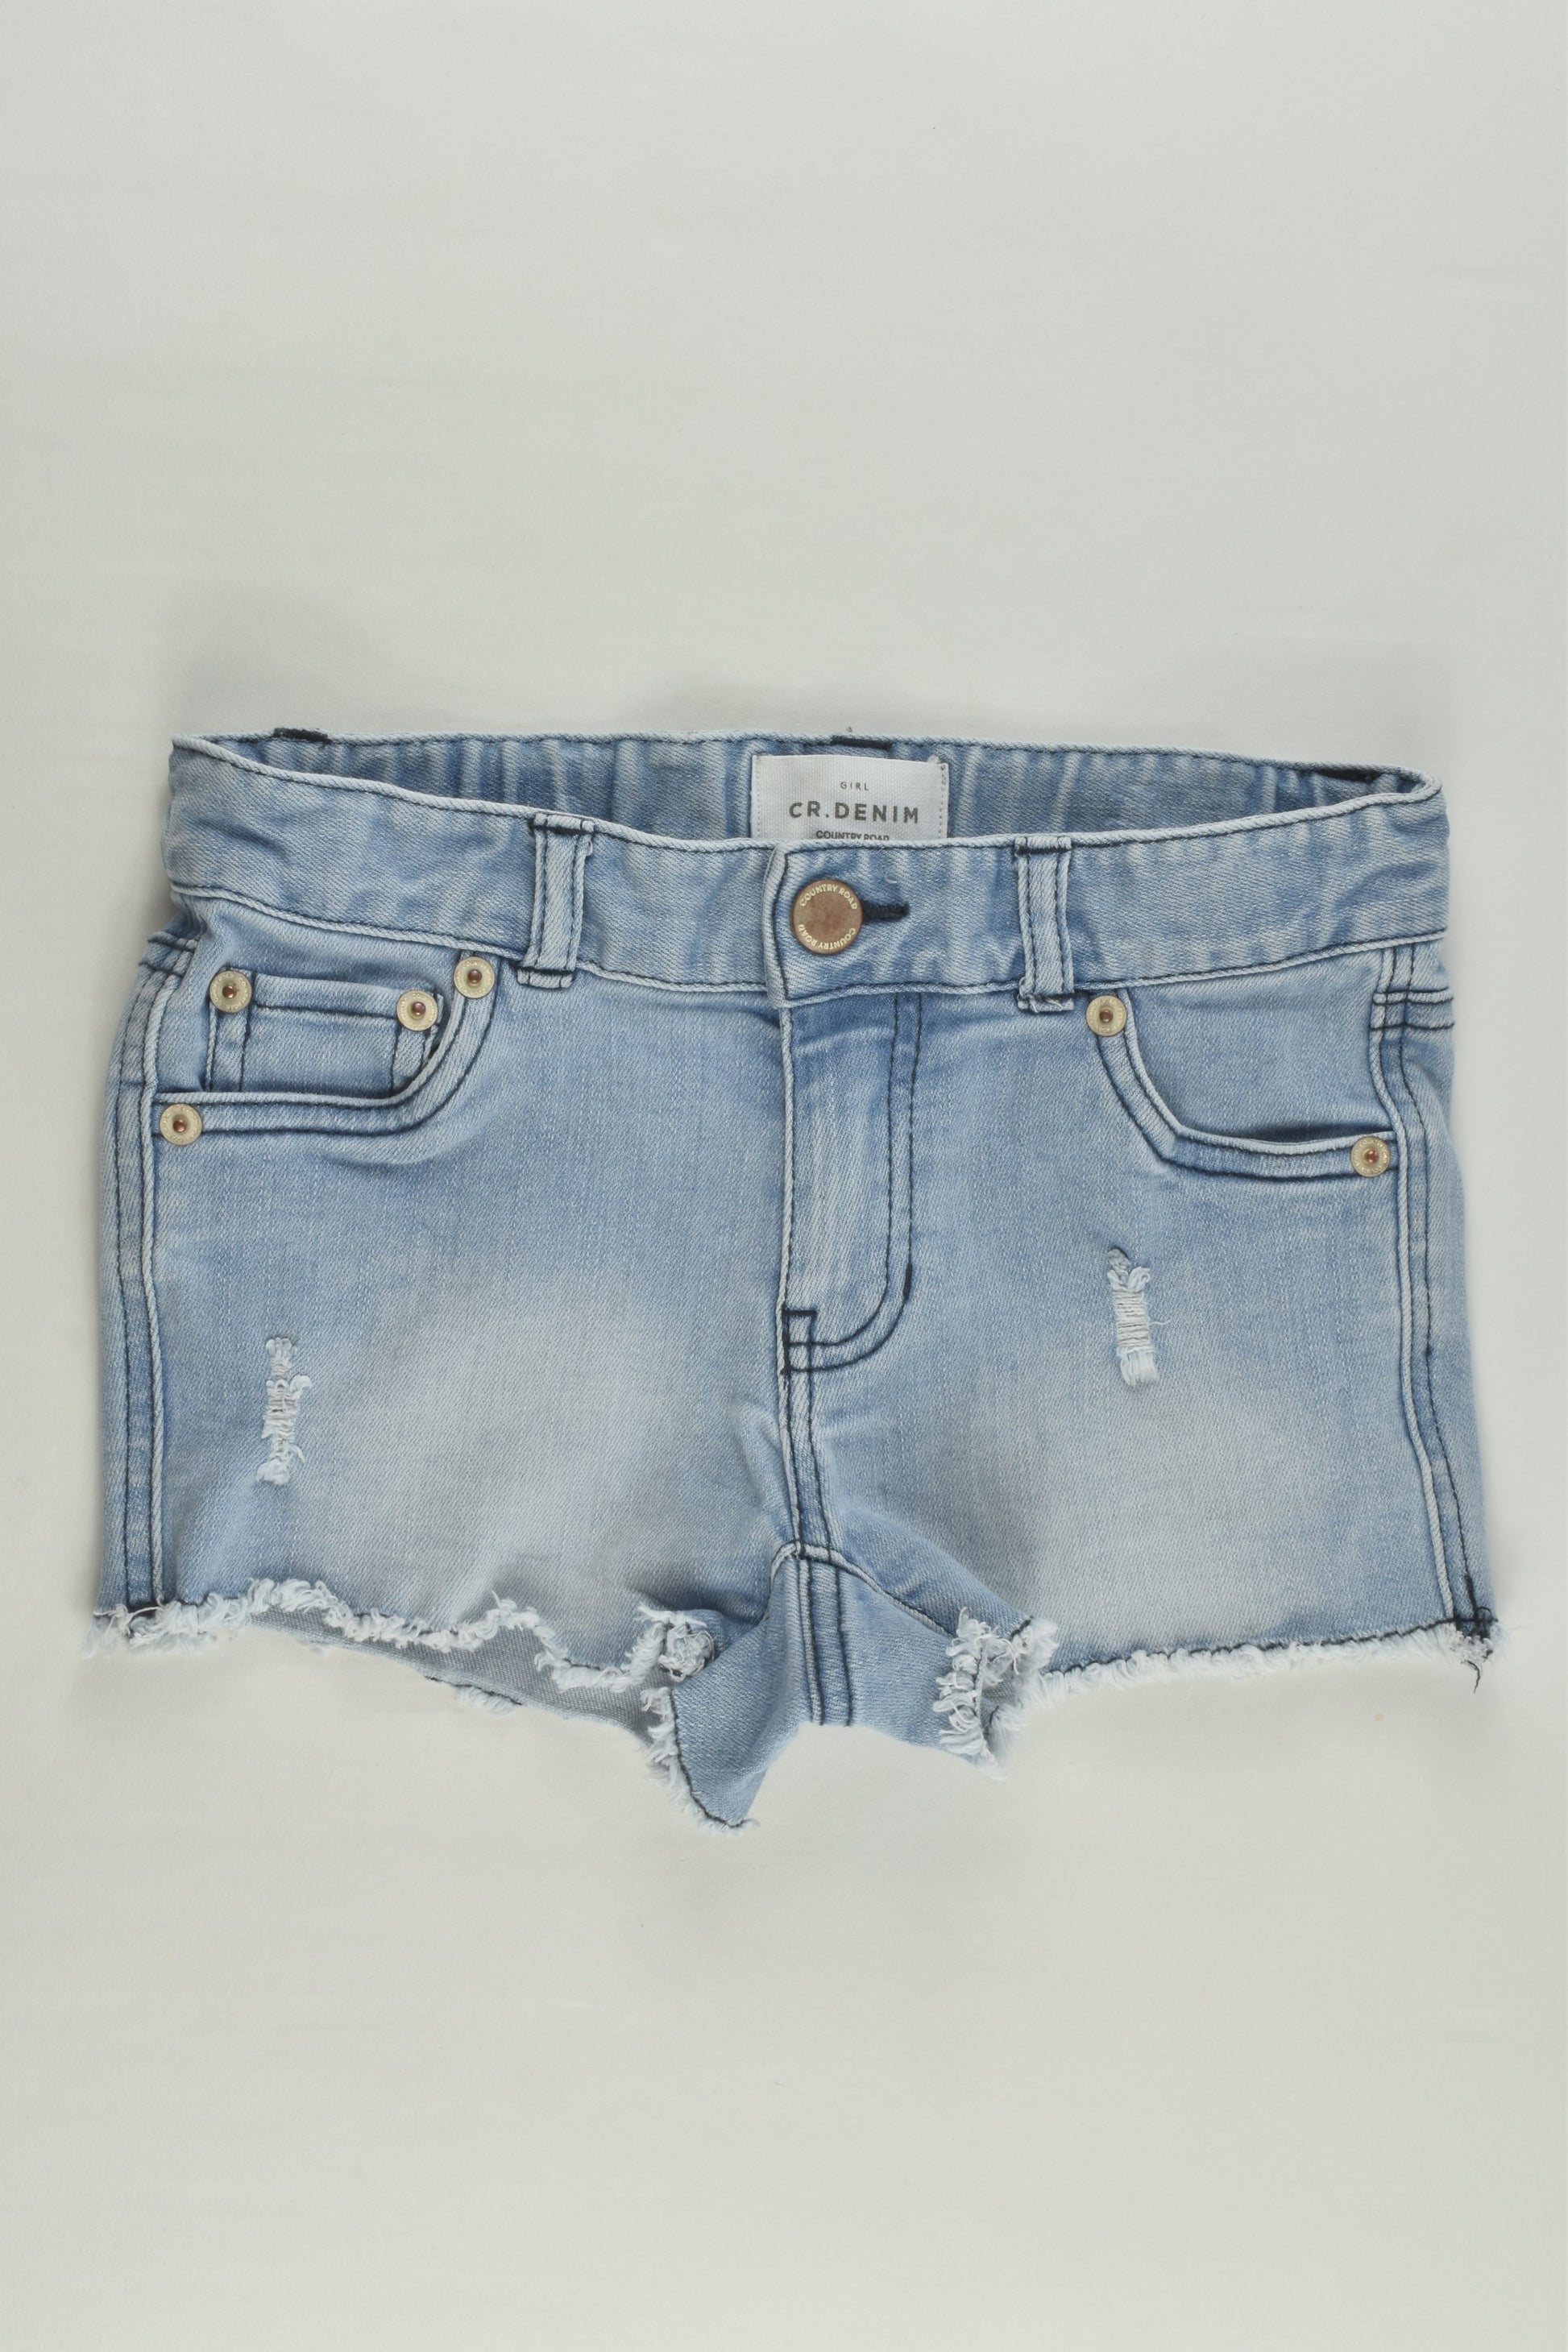 Country Road Size 7 Denim Shorts